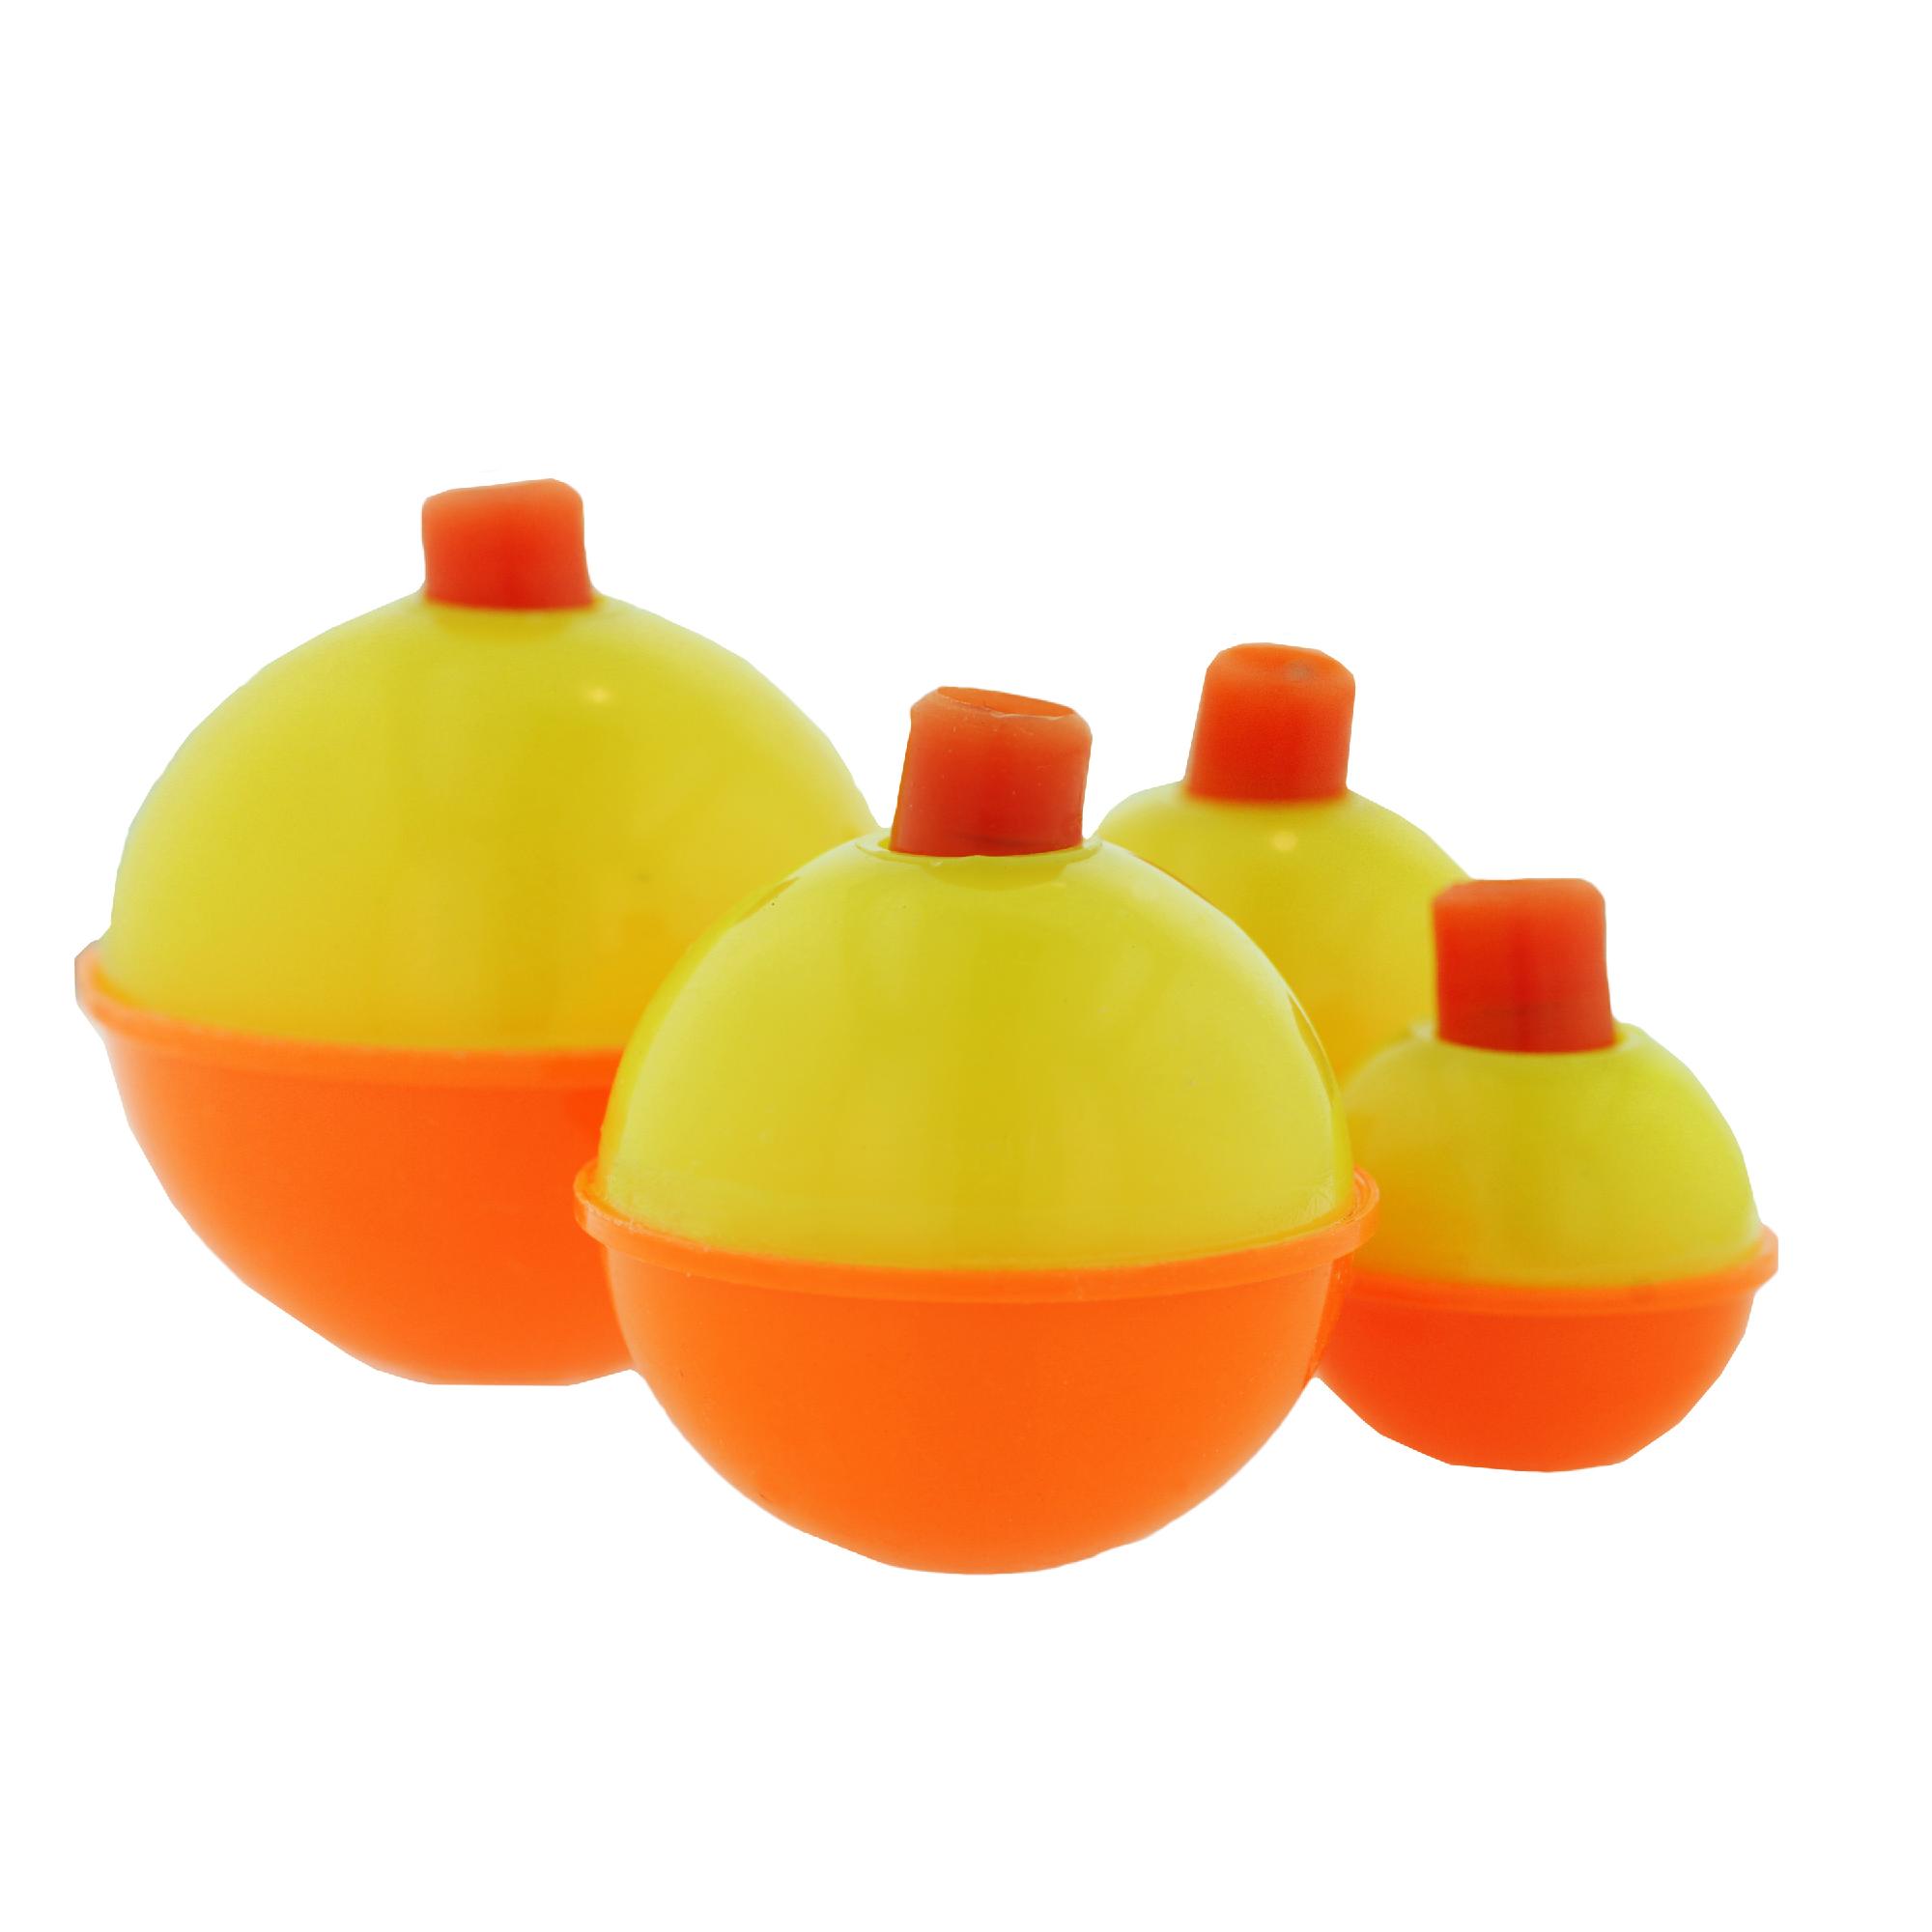 Snap-On Round Floats – Orange-Yellow, Assorted Sizes, (Per 12)